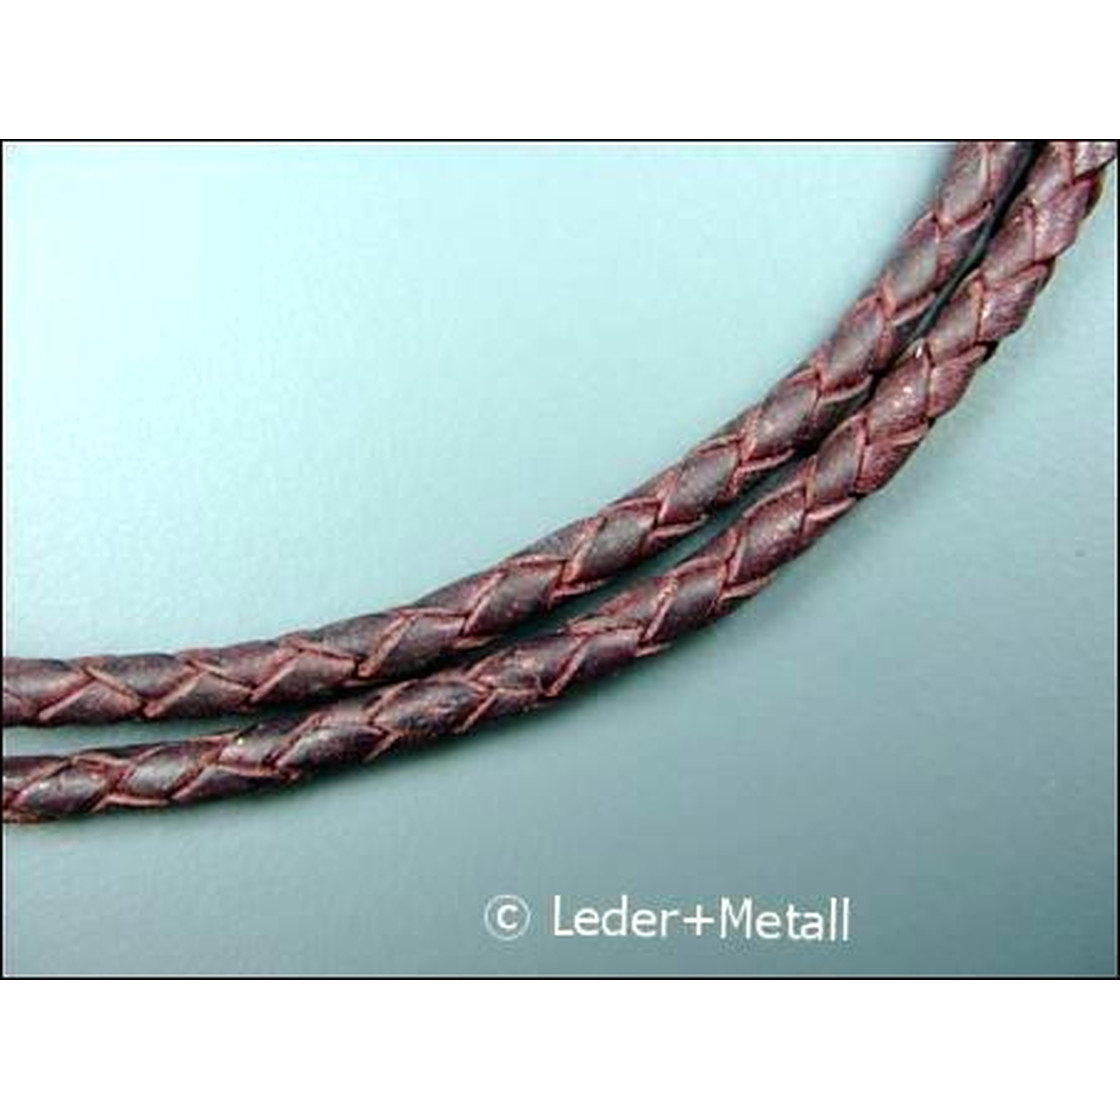 Round braided leather cord Ø4,0mm - saddle brown, 5,80 €